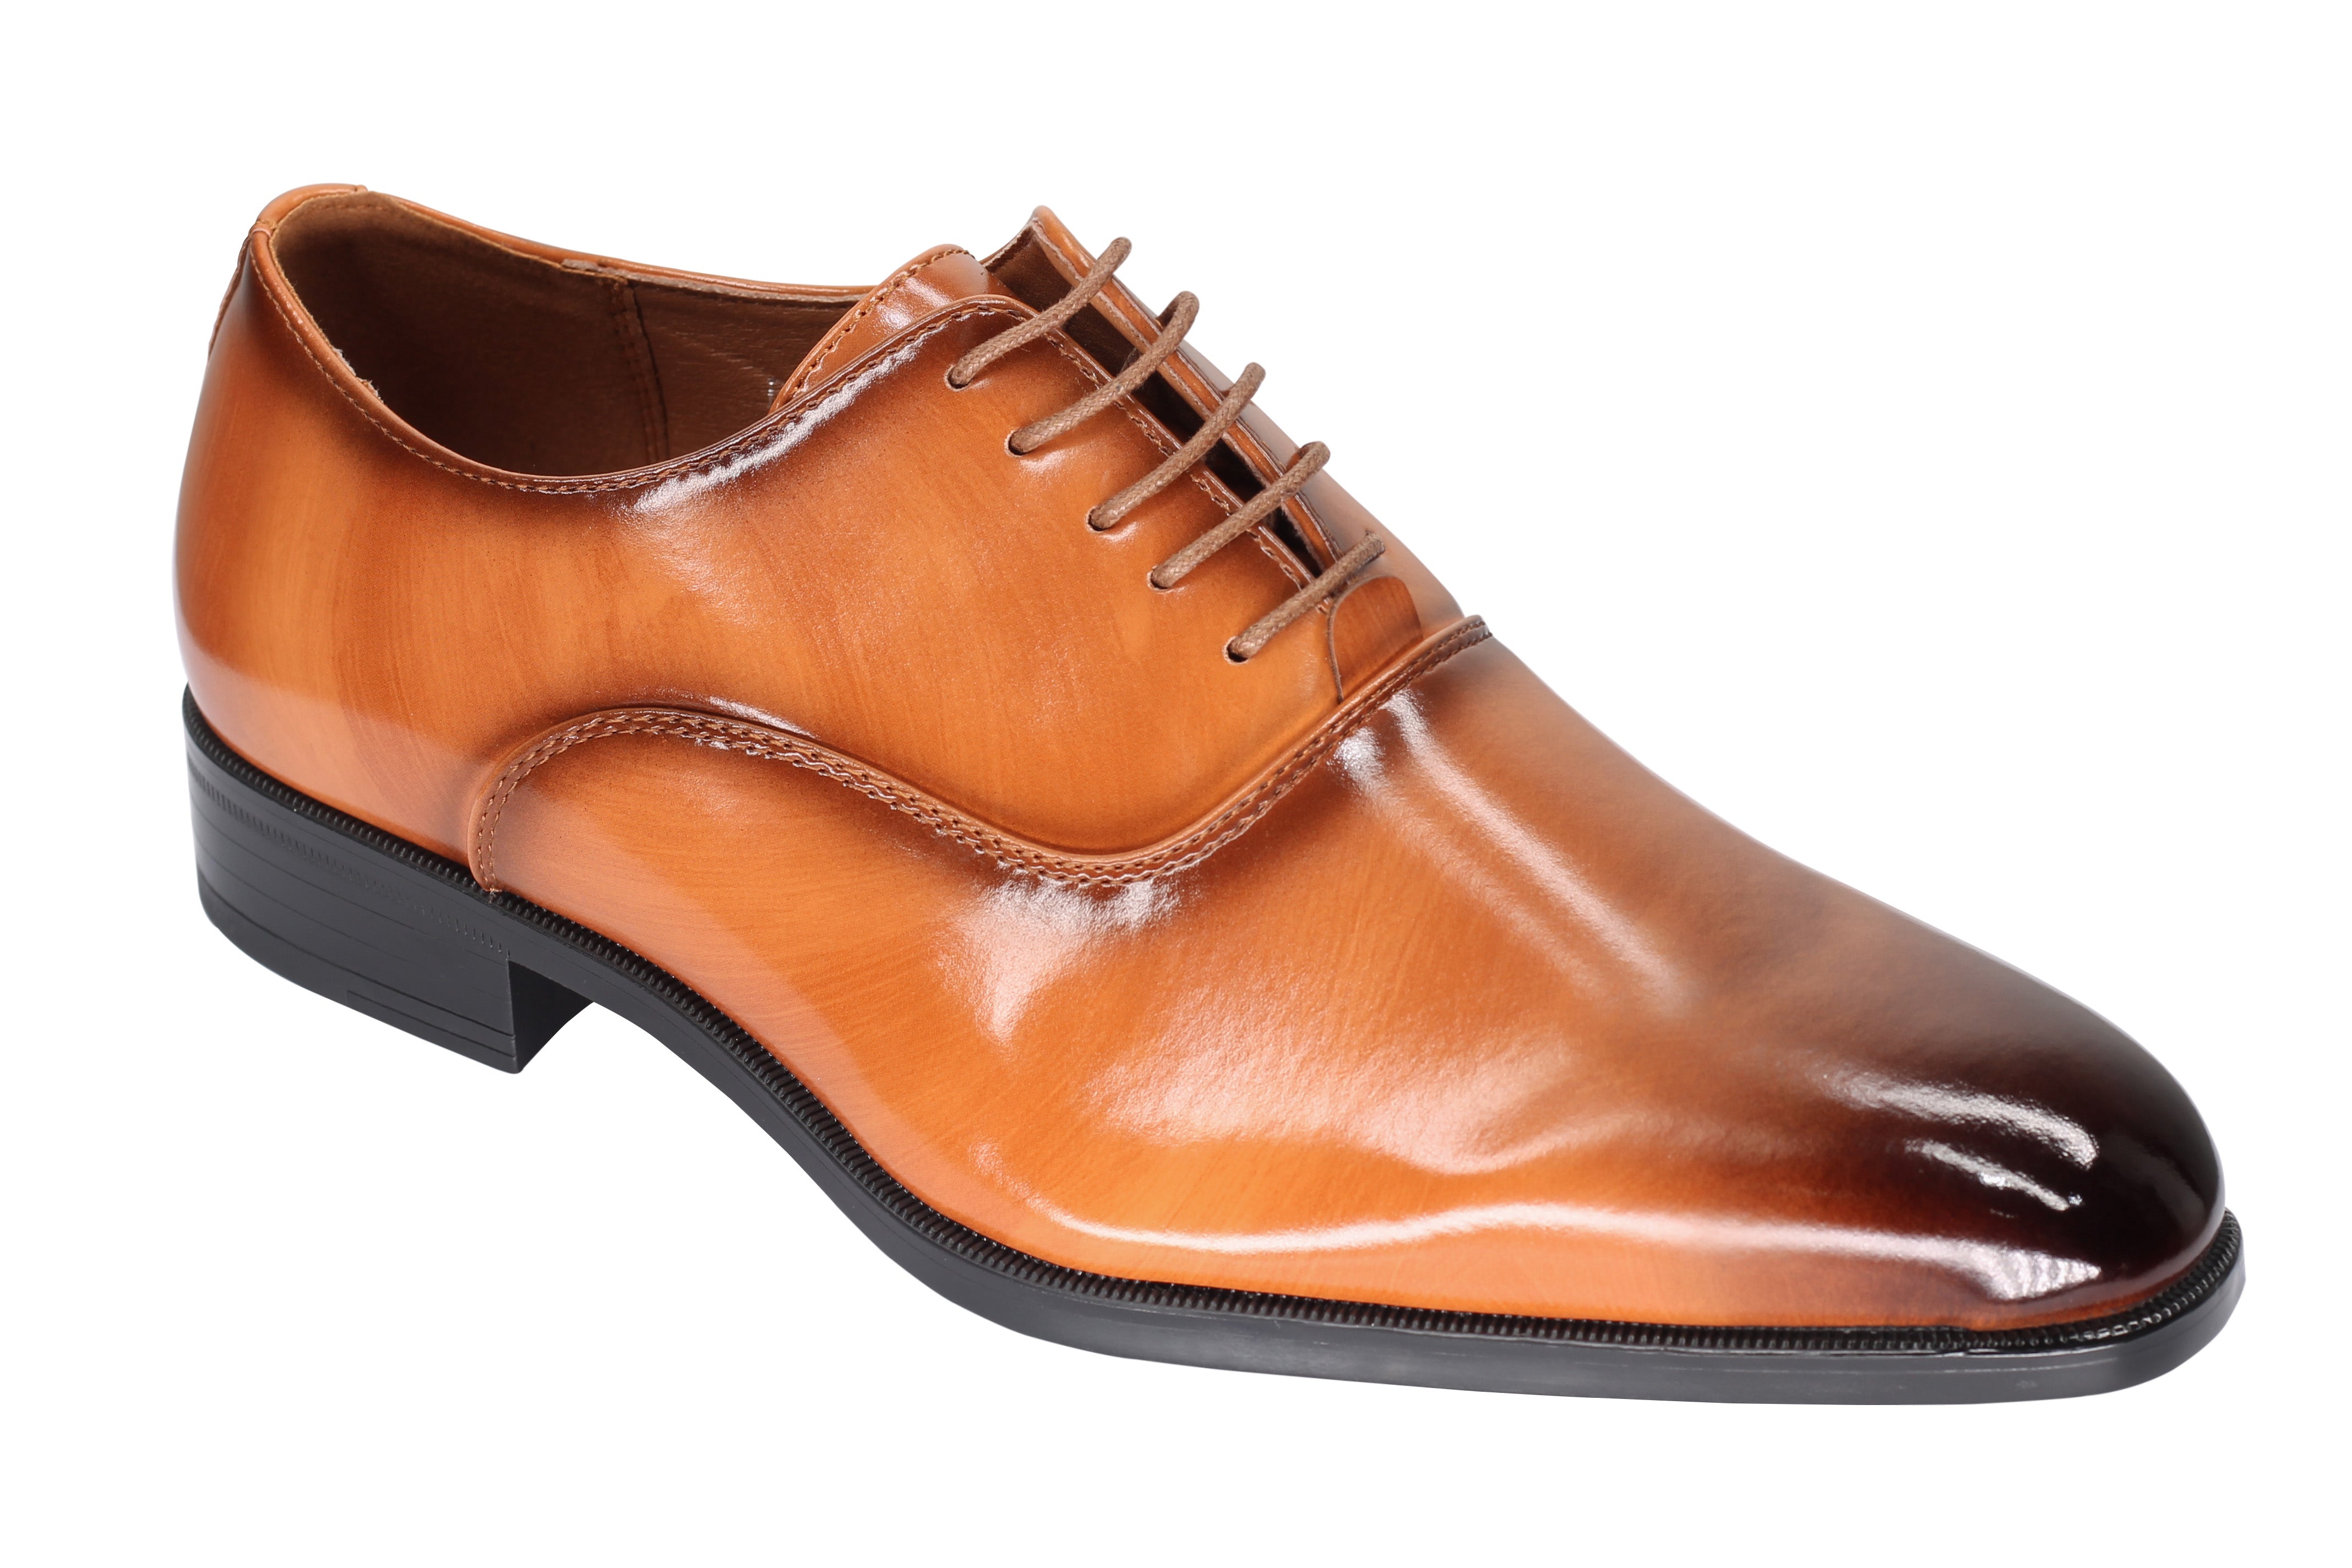 POLISHED OXFORD LACEUP SHOES